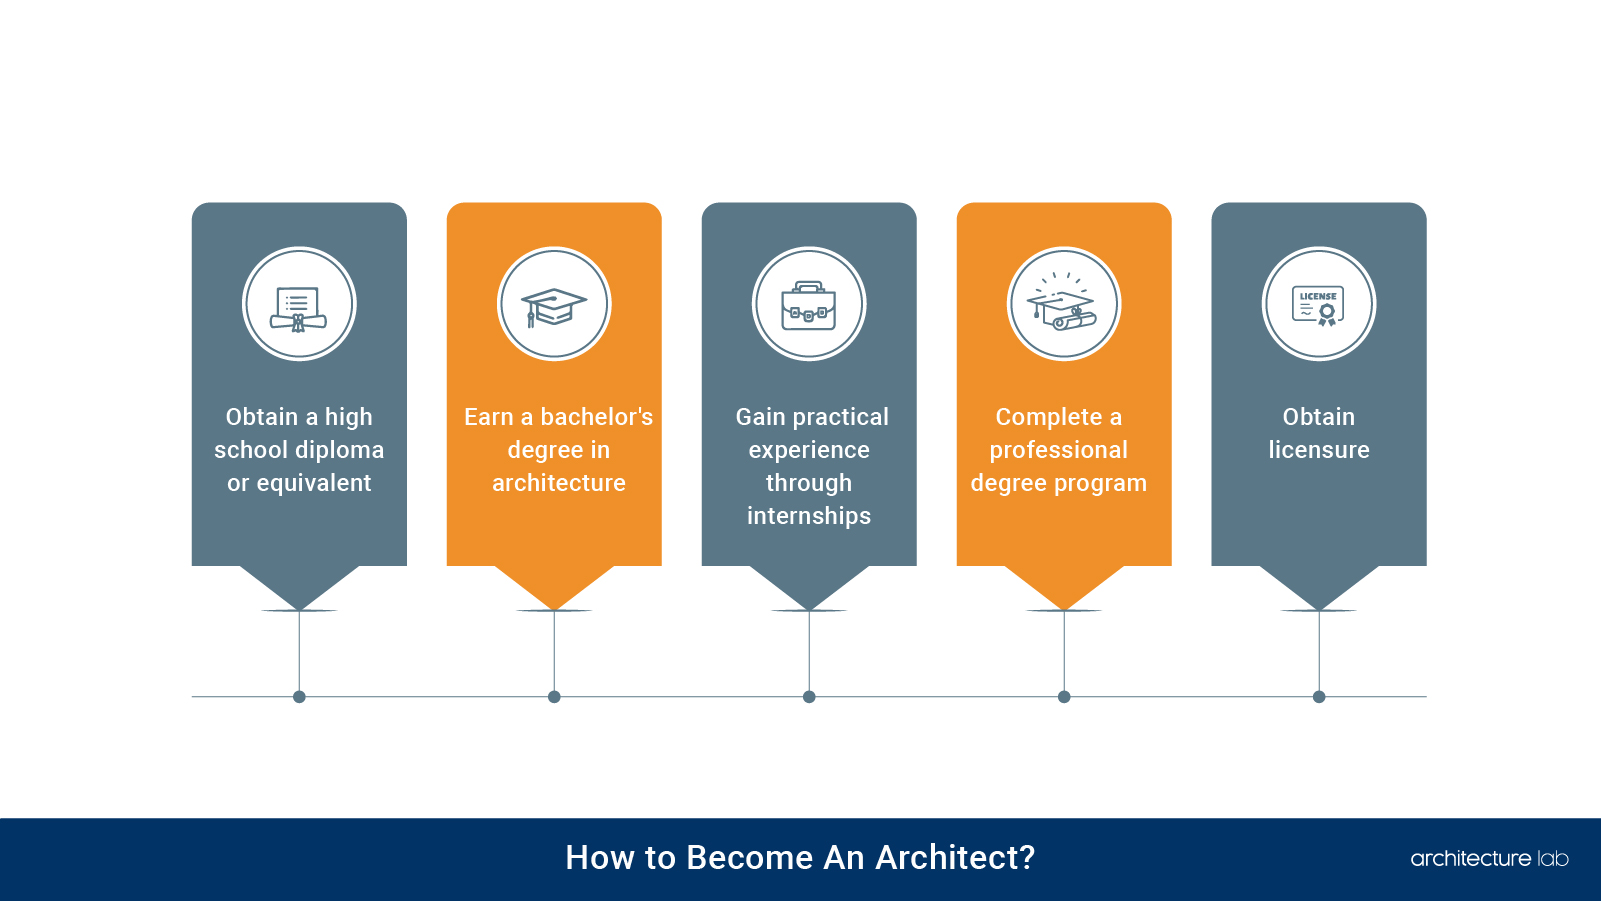 How to become an architect?